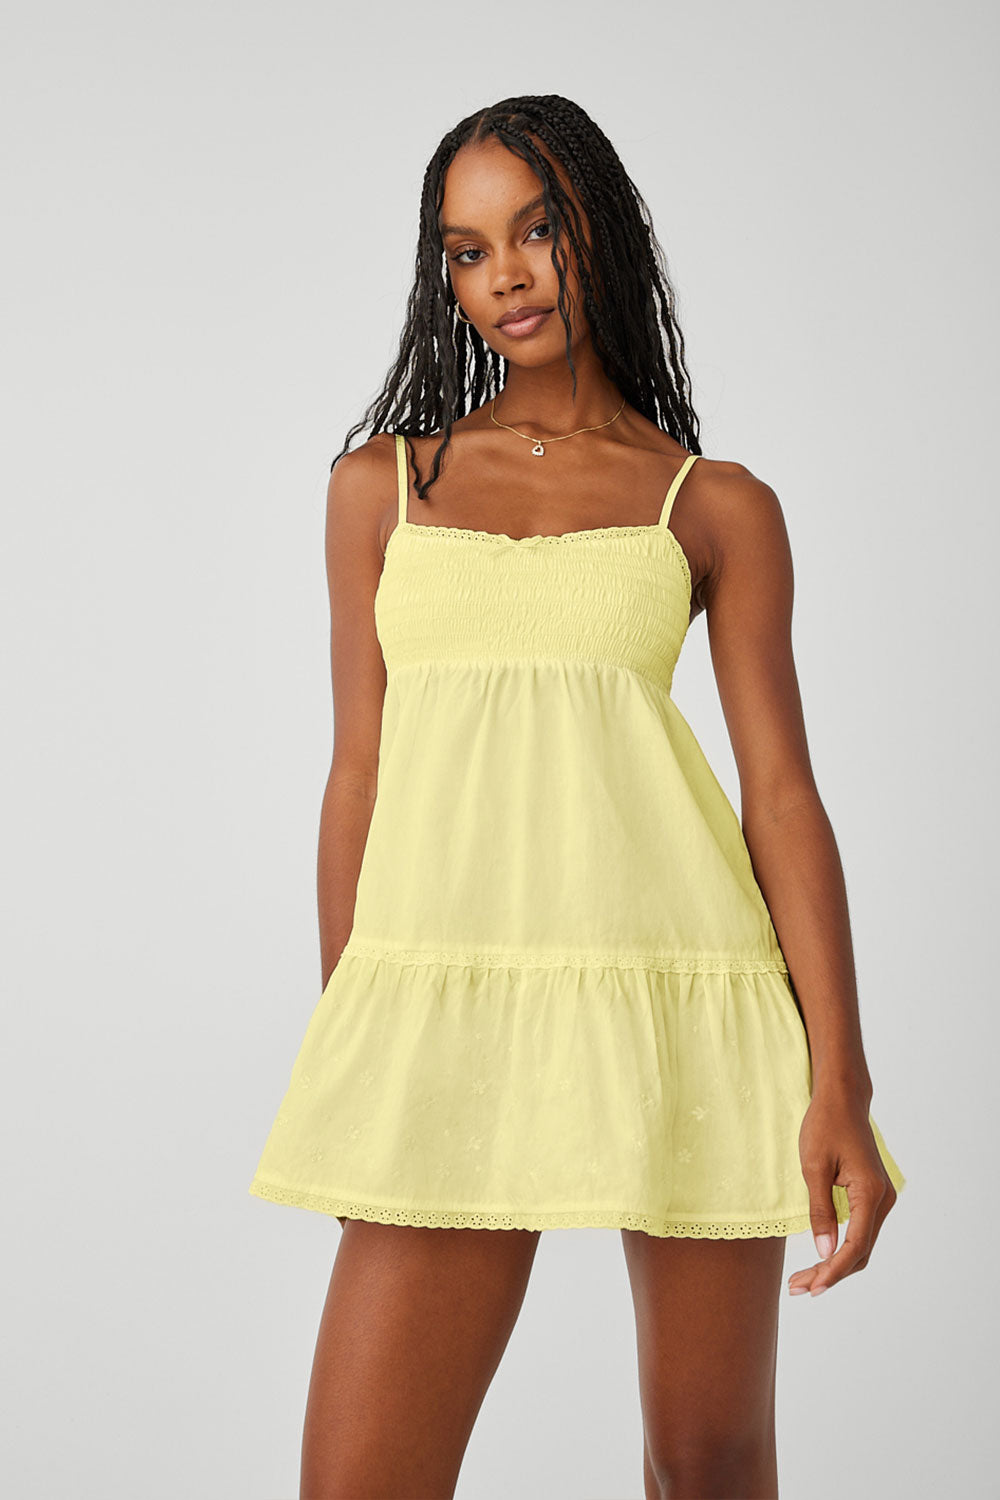 Baby Embroidered Mini Dress - Honey Butter